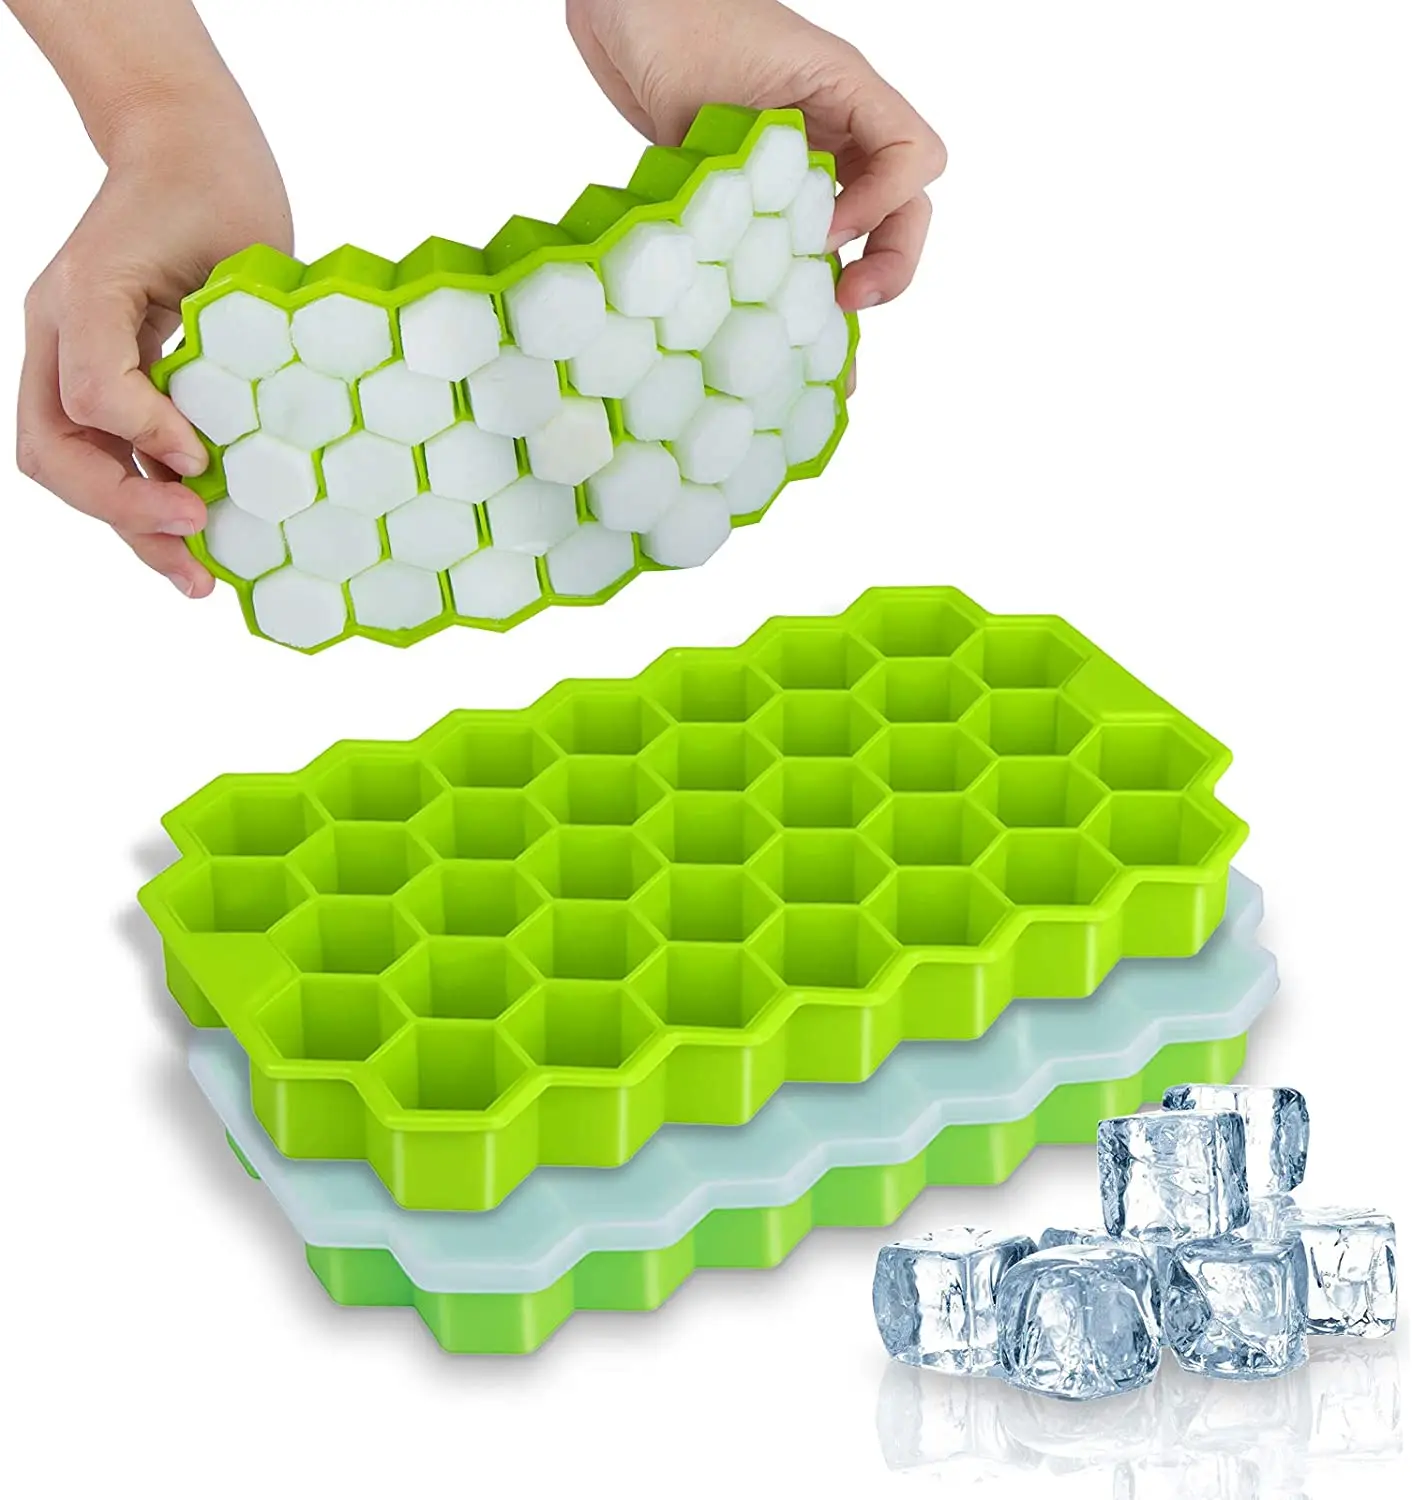 

37 Cavity Novelty Silicone Ice Cube Molds,silicone Honeycomb Ice Cube Trays Maker With Removable Lids